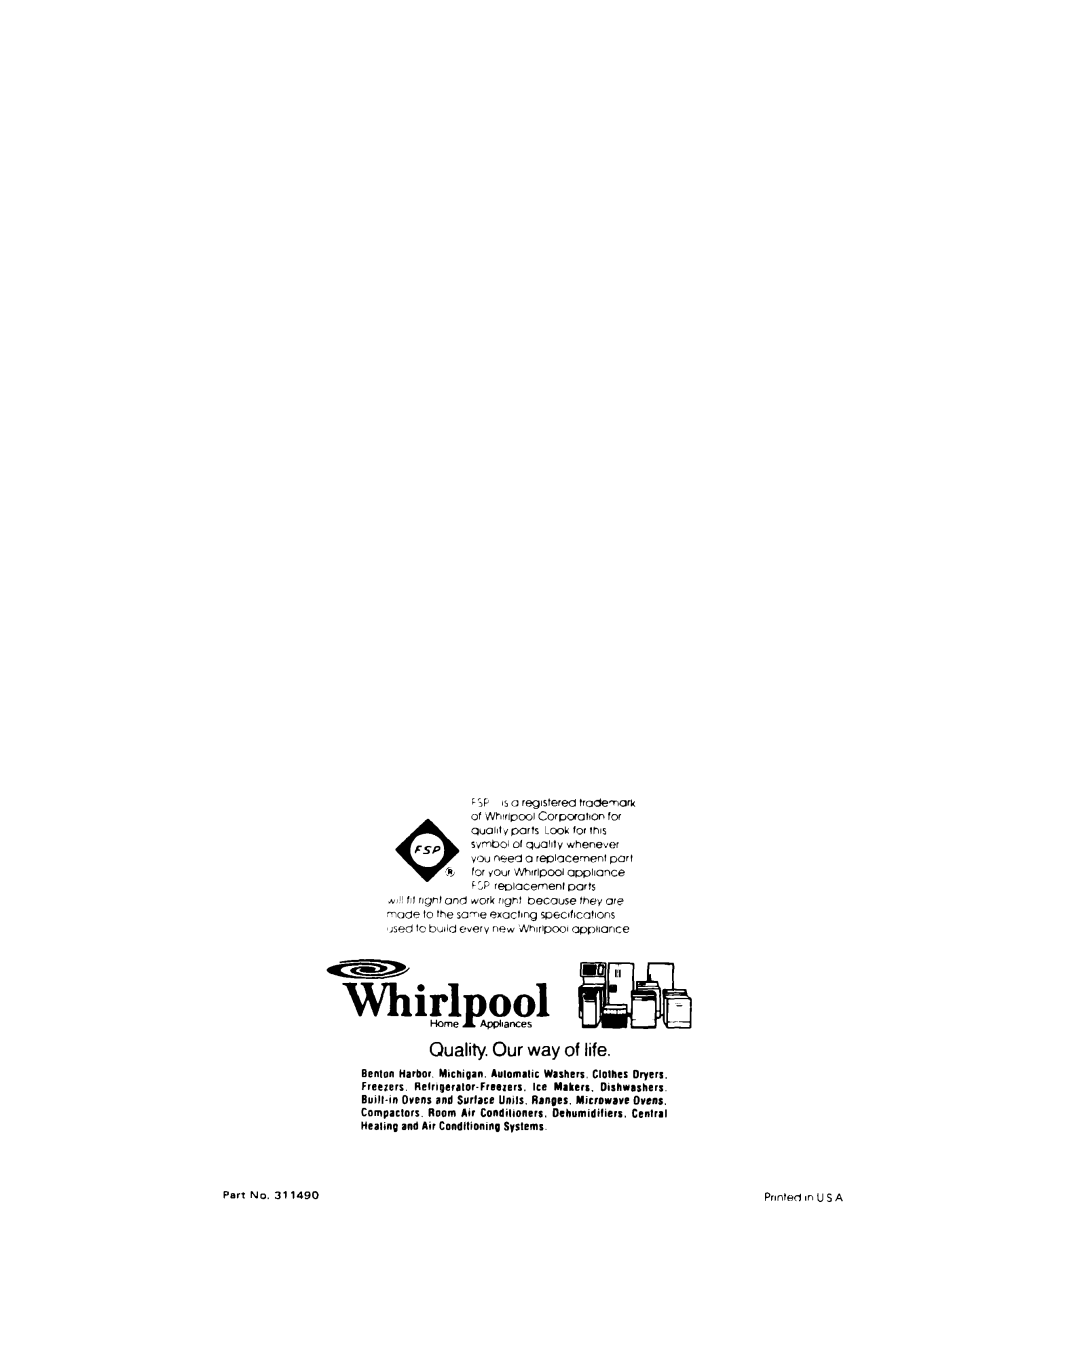 Whirlpool RJM 7800 manual Whirlpool Home Appliances, Quality. Our way of life 